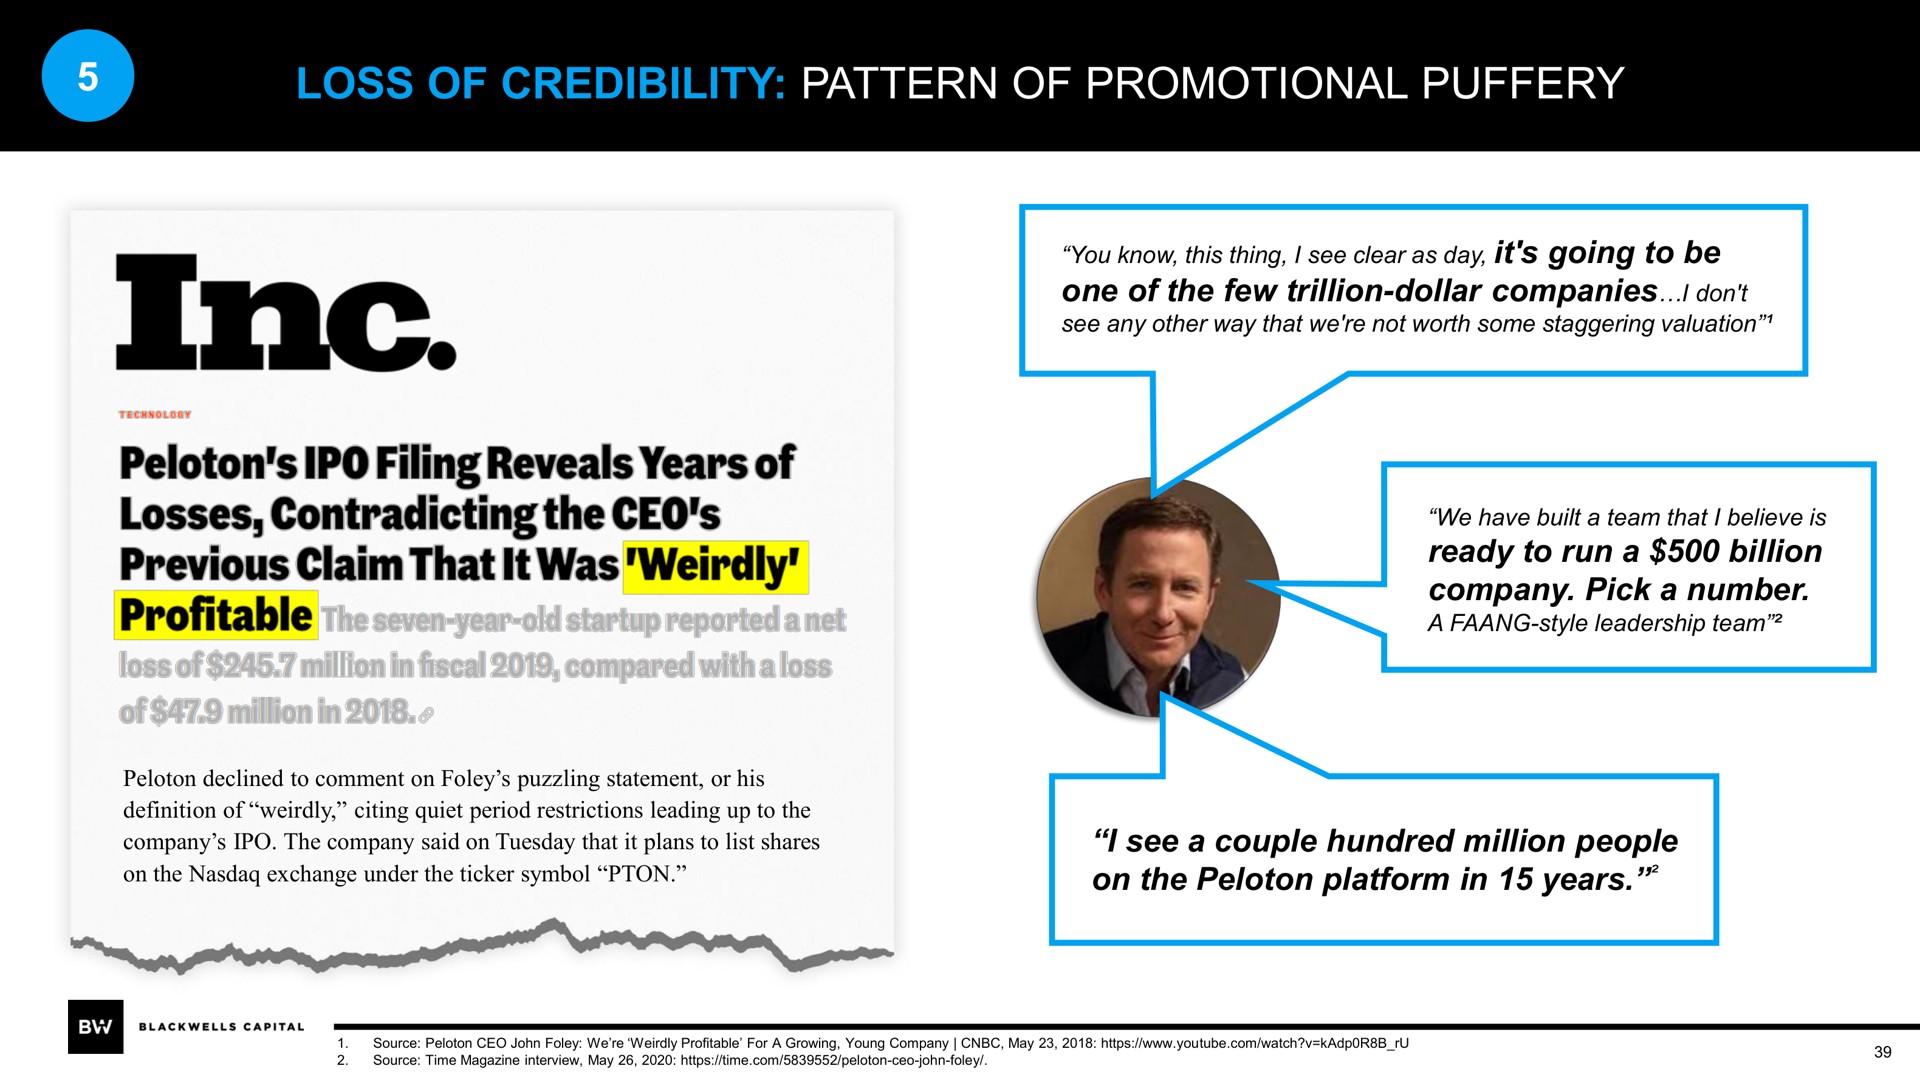 loss of credibility pattern of promotional puffery peloton filing reveals years losses contradicting the previous claim that it was weirdly profitable gree | Blackwells Capital